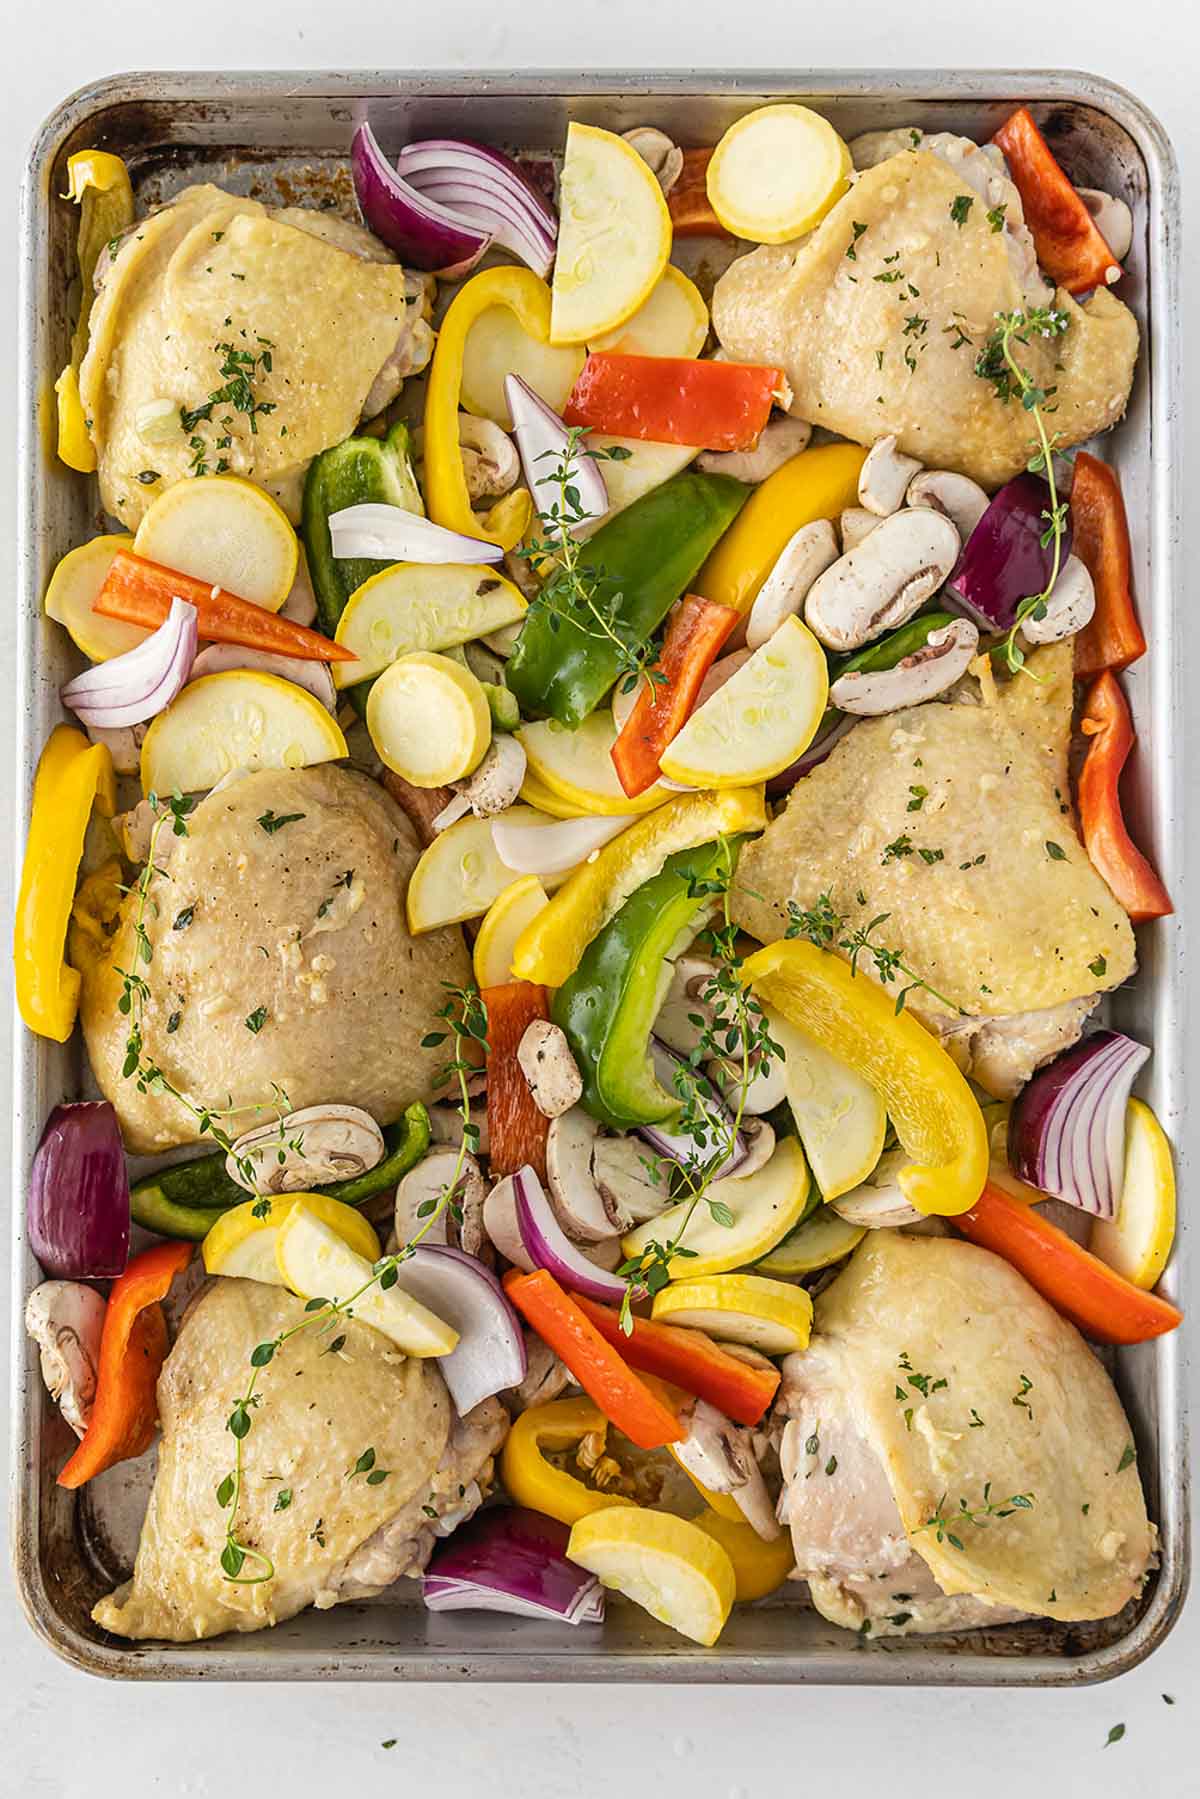 baking sheet with partly cooked chicken thighs surrounded by uncooked red bell peppers, yellow peppers, mushrooms, squash and red onions